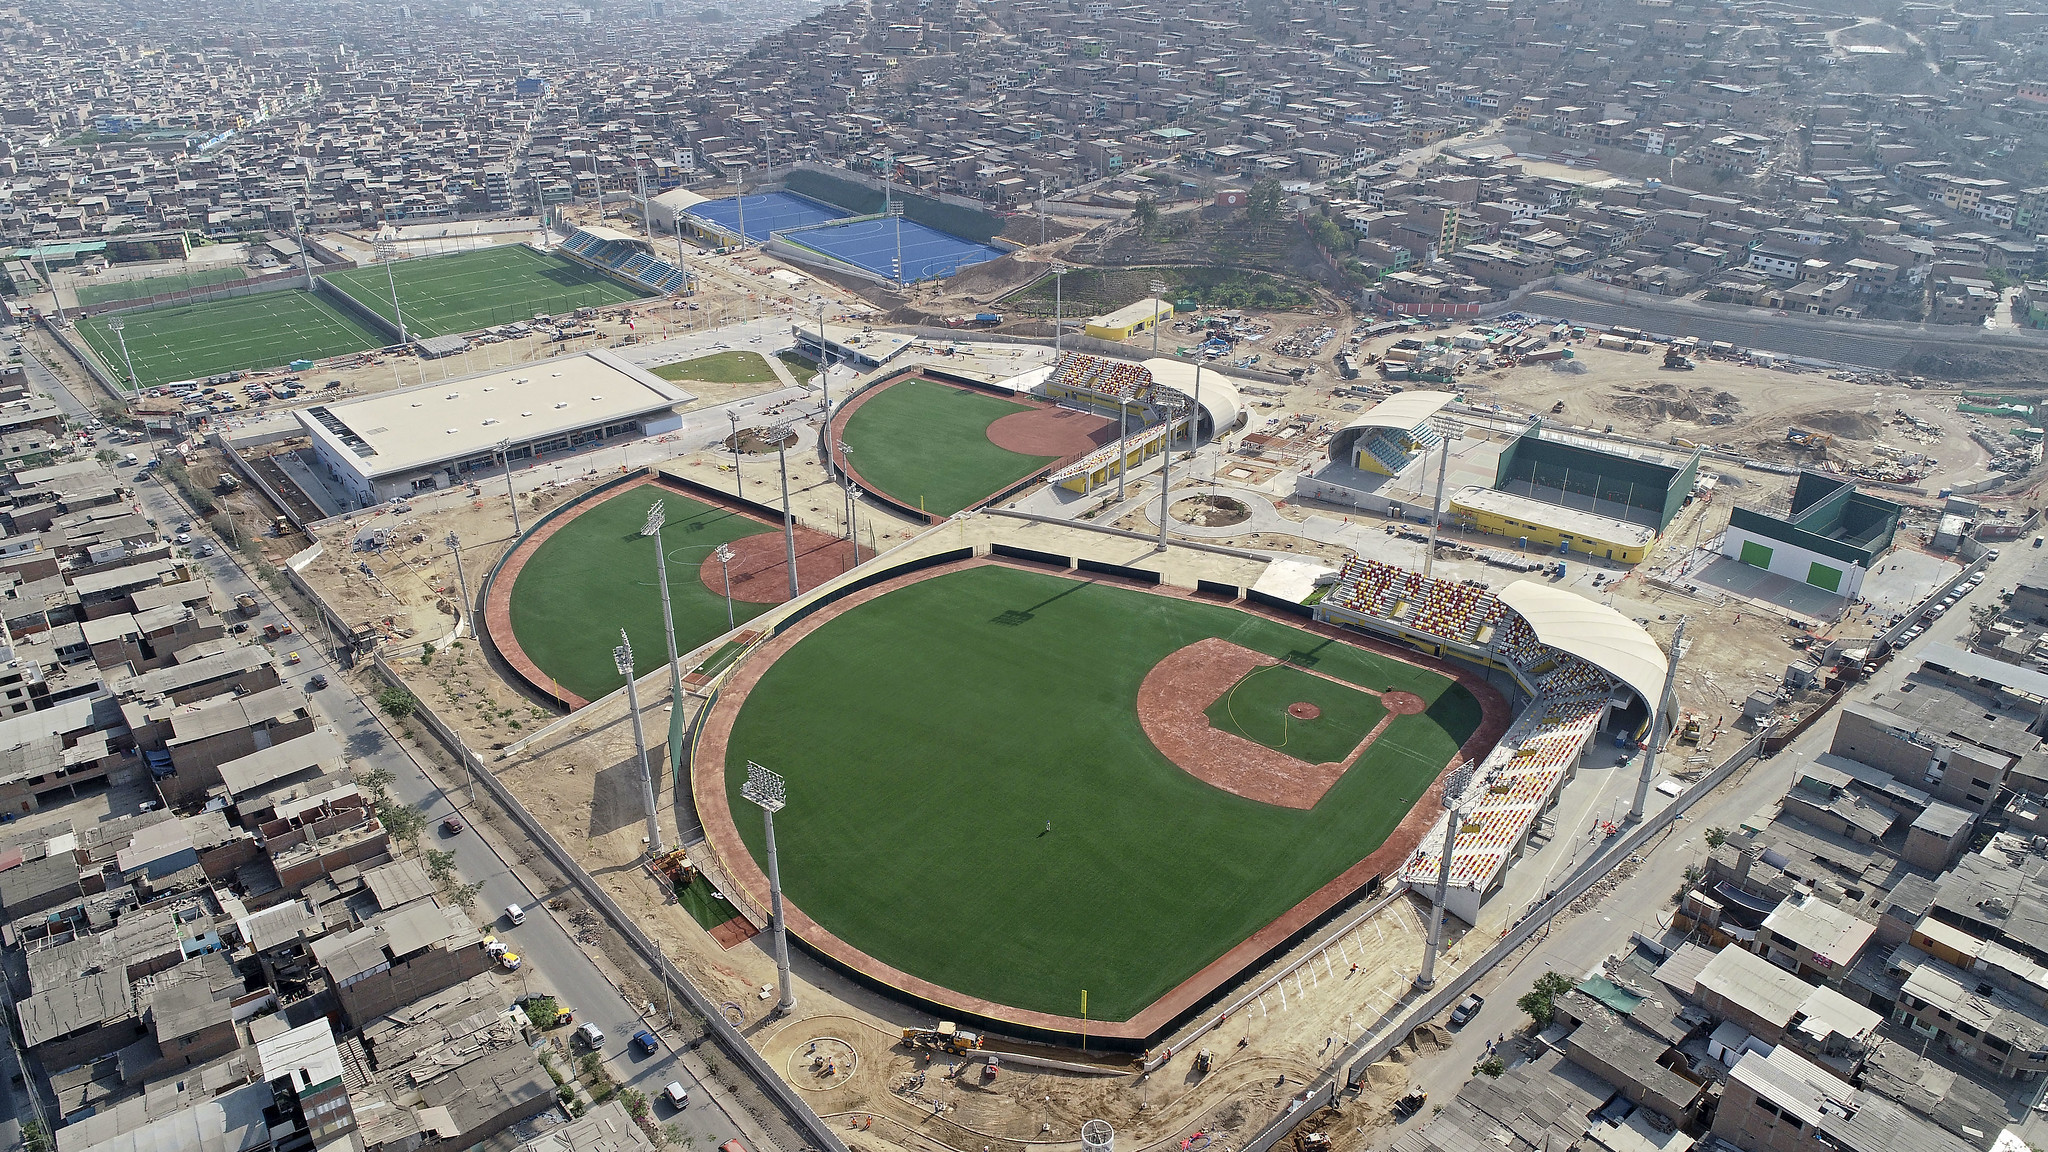 Competition will take place at Villa María del Triunfo, used for softball at the Lima 2019 Pan American Games ©Lima 2019